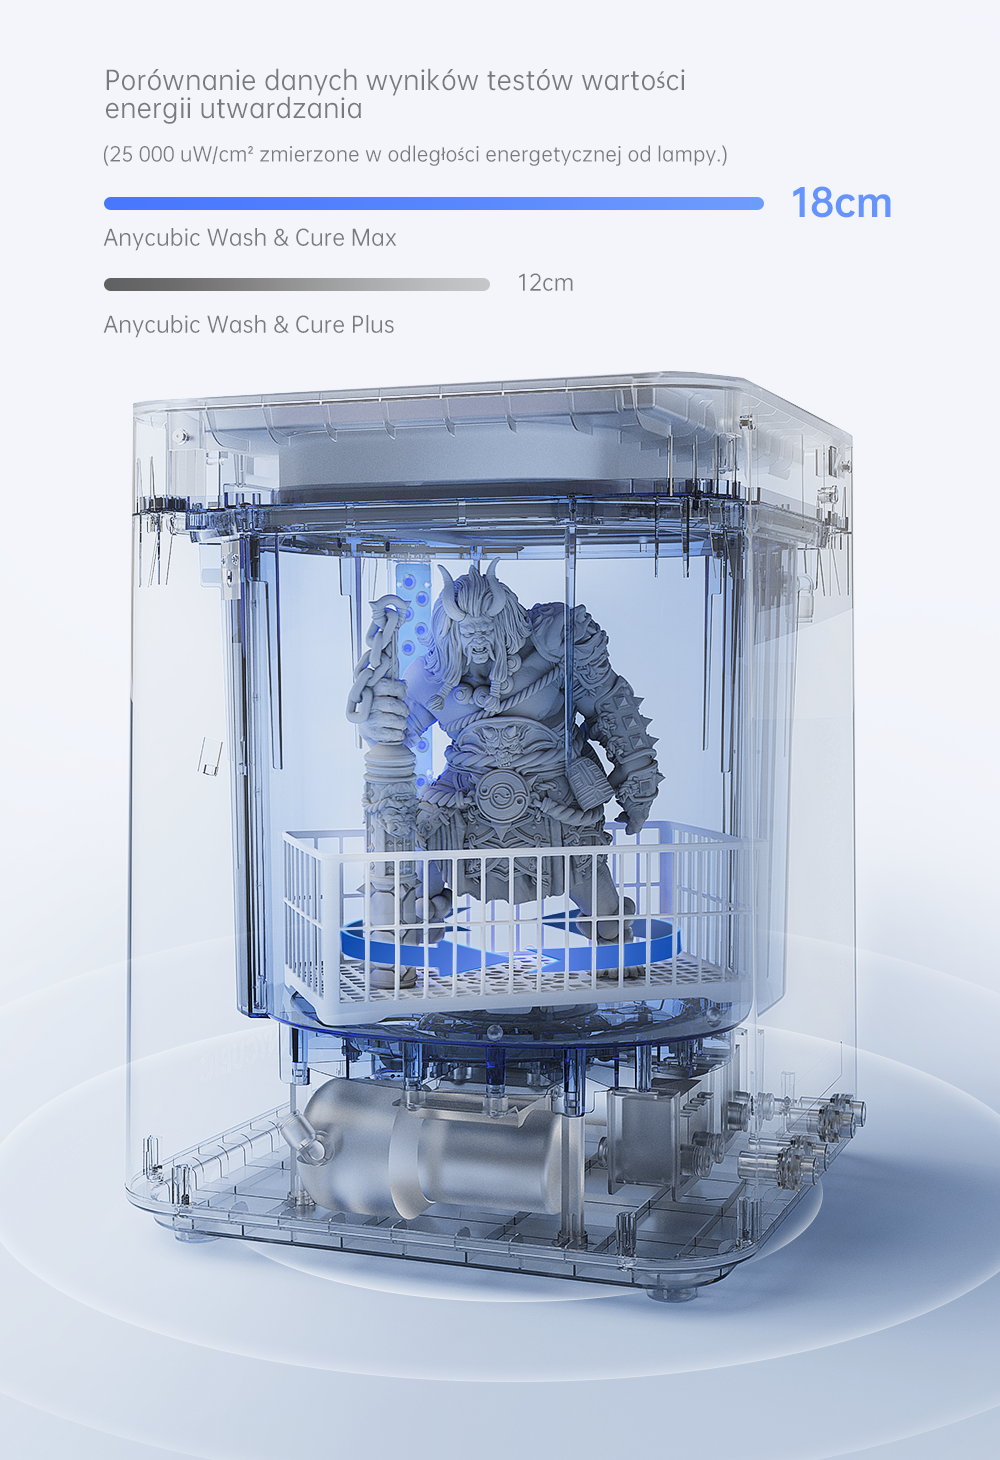 Anycubic Wash & Cure Max - 360° Dimensional Curing